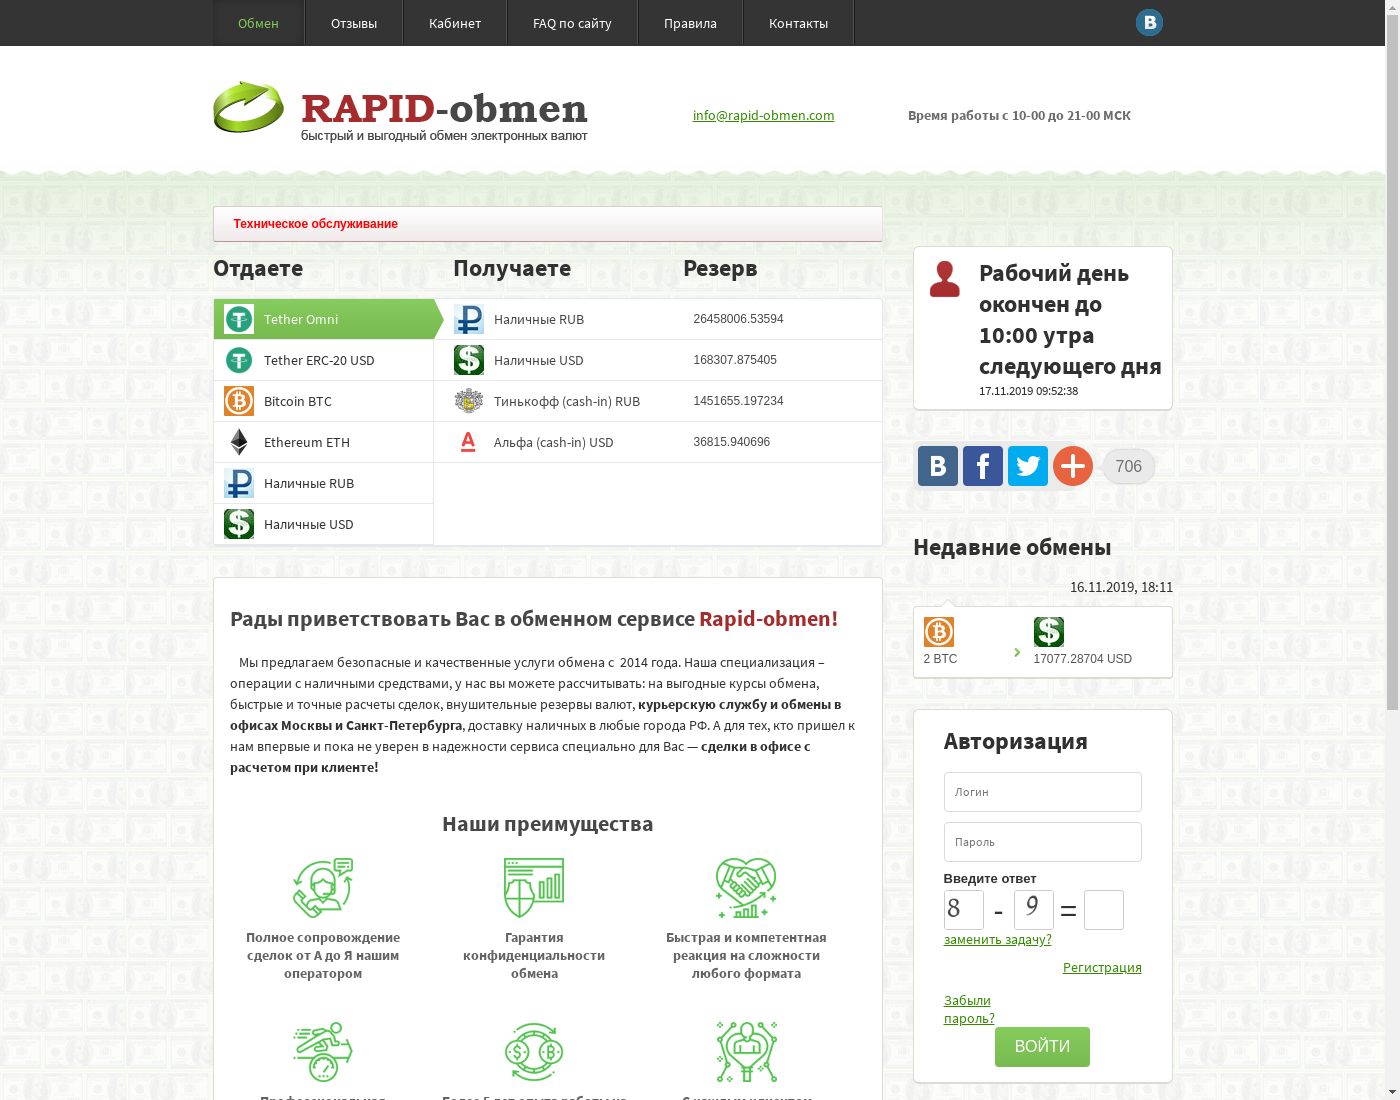 rapid-obmen user interface: the home page in English